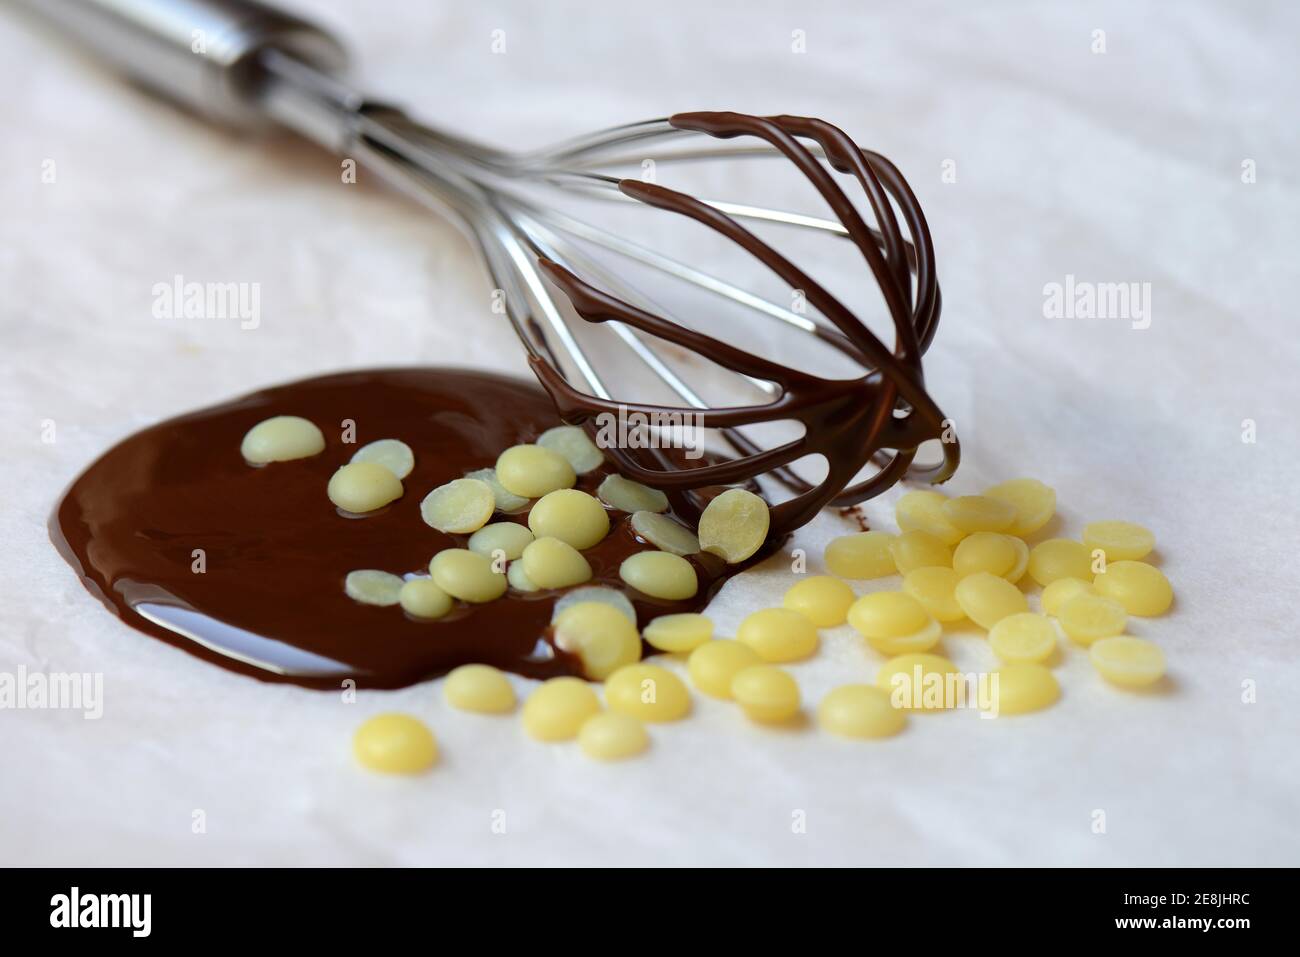 Cocoa butter and melted chocolate coating with whisk( Theobroma cacao) , cocoa, melted, chocolate ingredient Stock Photo